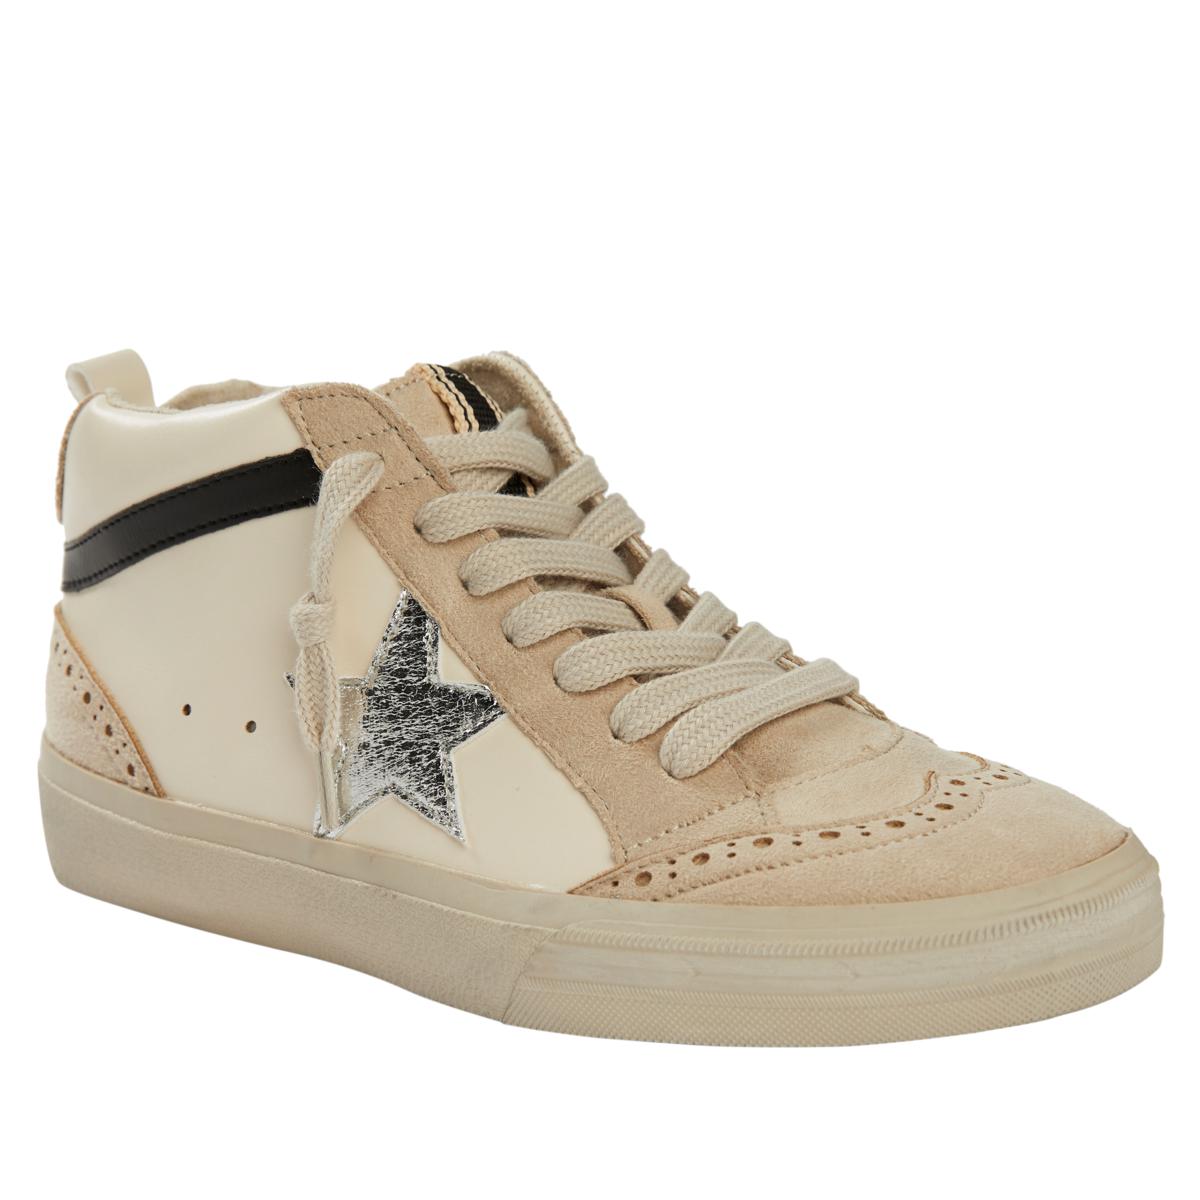 Paulina Women's High Top Sneaker with silver star